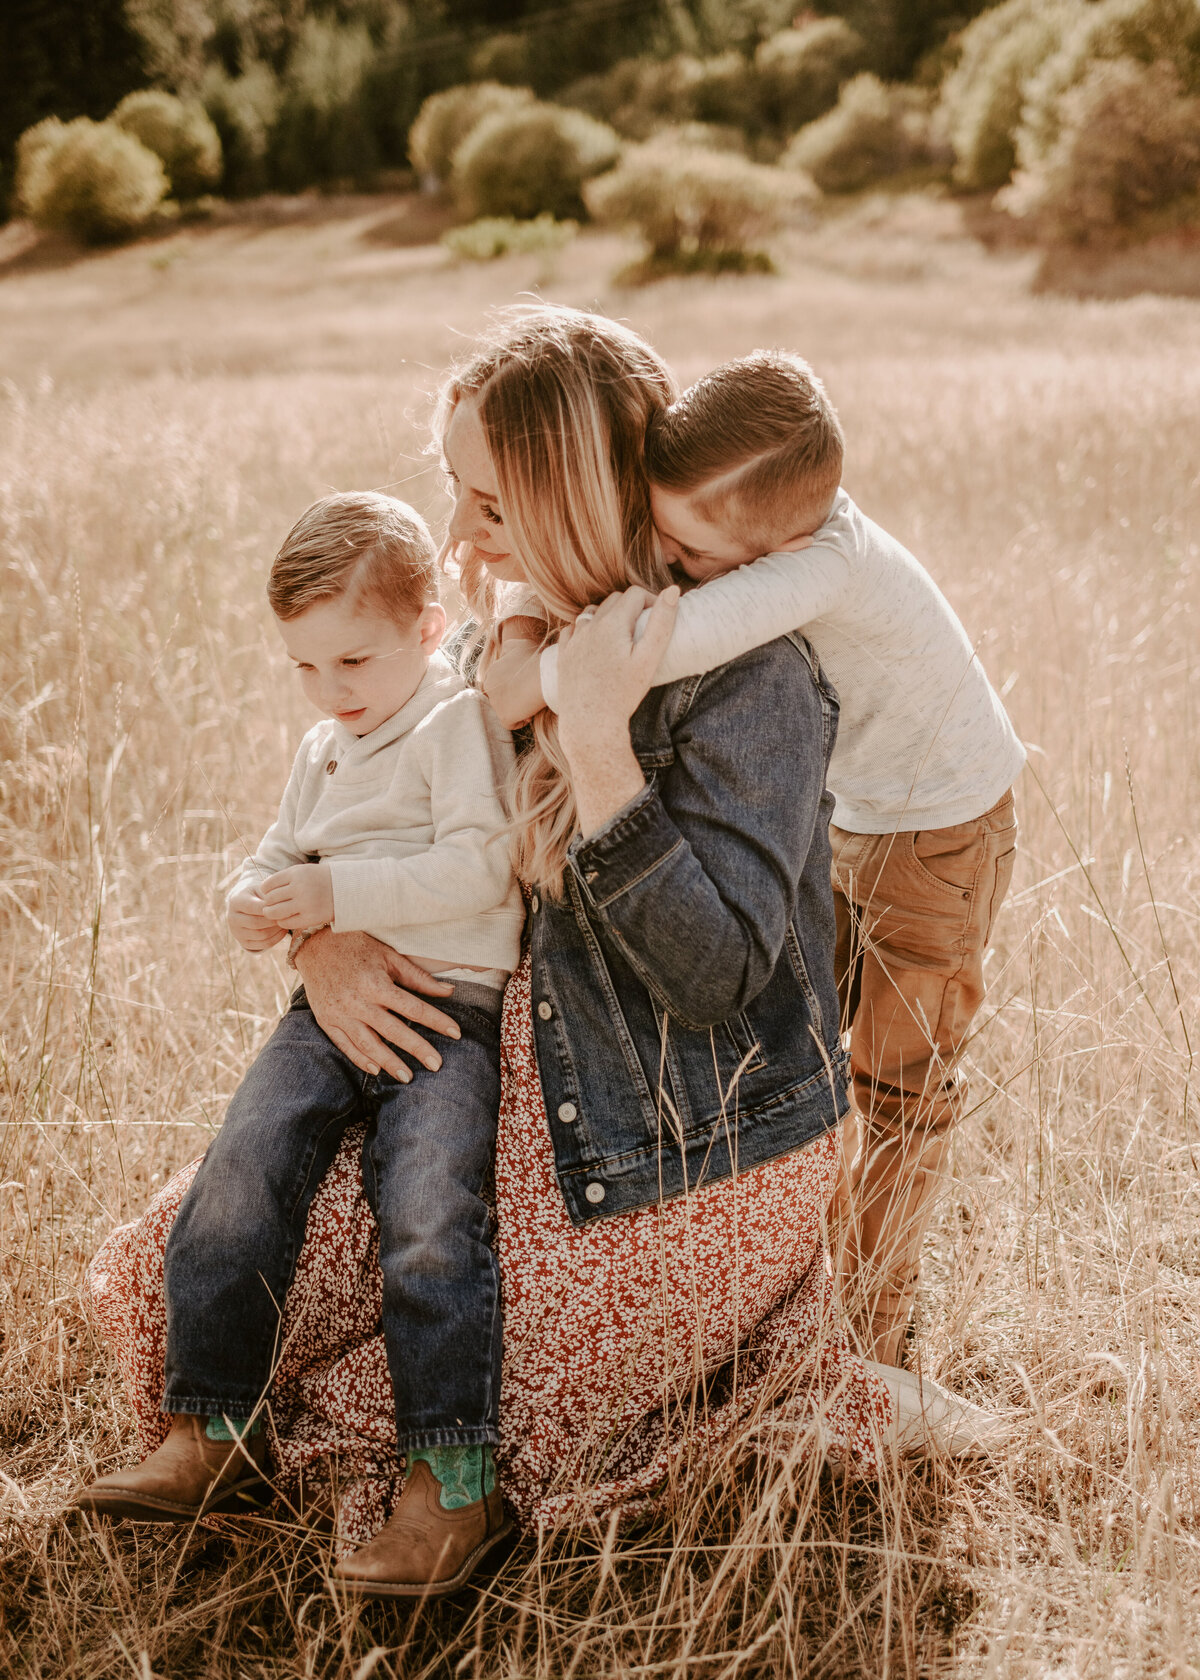 wenatchee photographer - natural light family photos in a field - Abbygale Marie Photography7